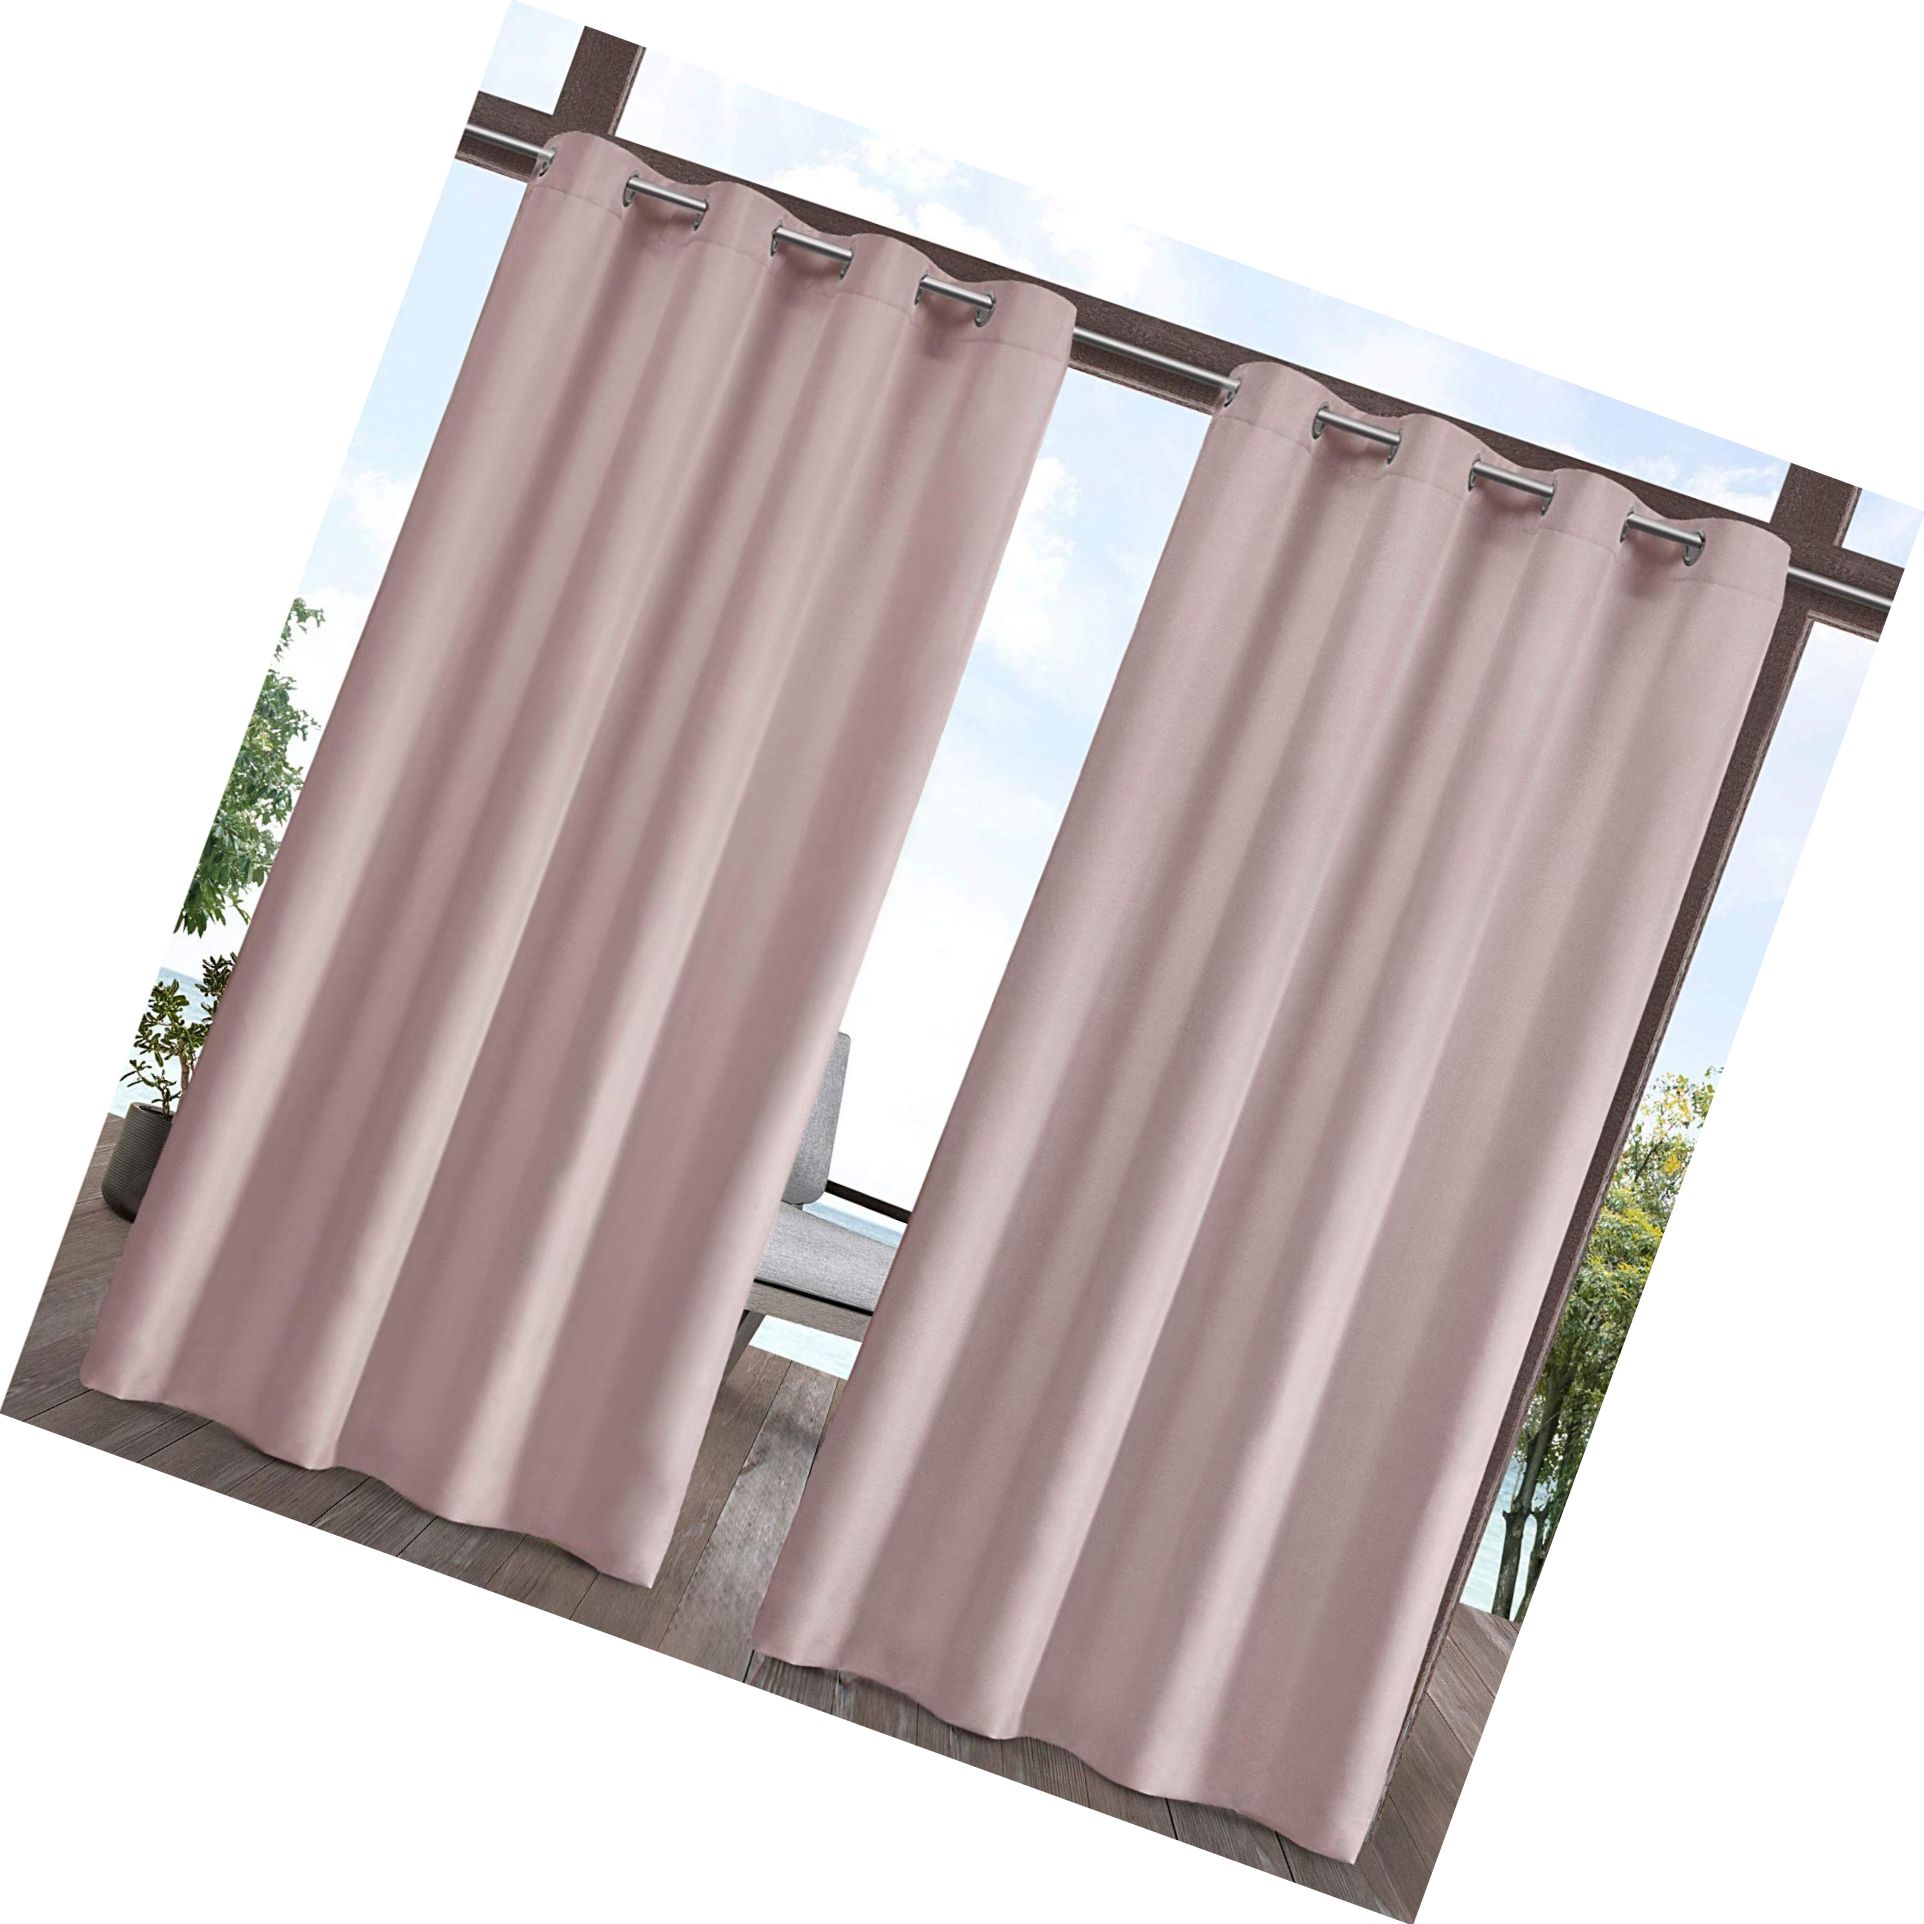 2021 Solid Grommet Top Curtain Panel Pairs Pertaining To Details About Exclusive Home Indoor/outdoor Solid Cabana Grommet Top  Curtain Panel Pair,  (View 4 of 20)